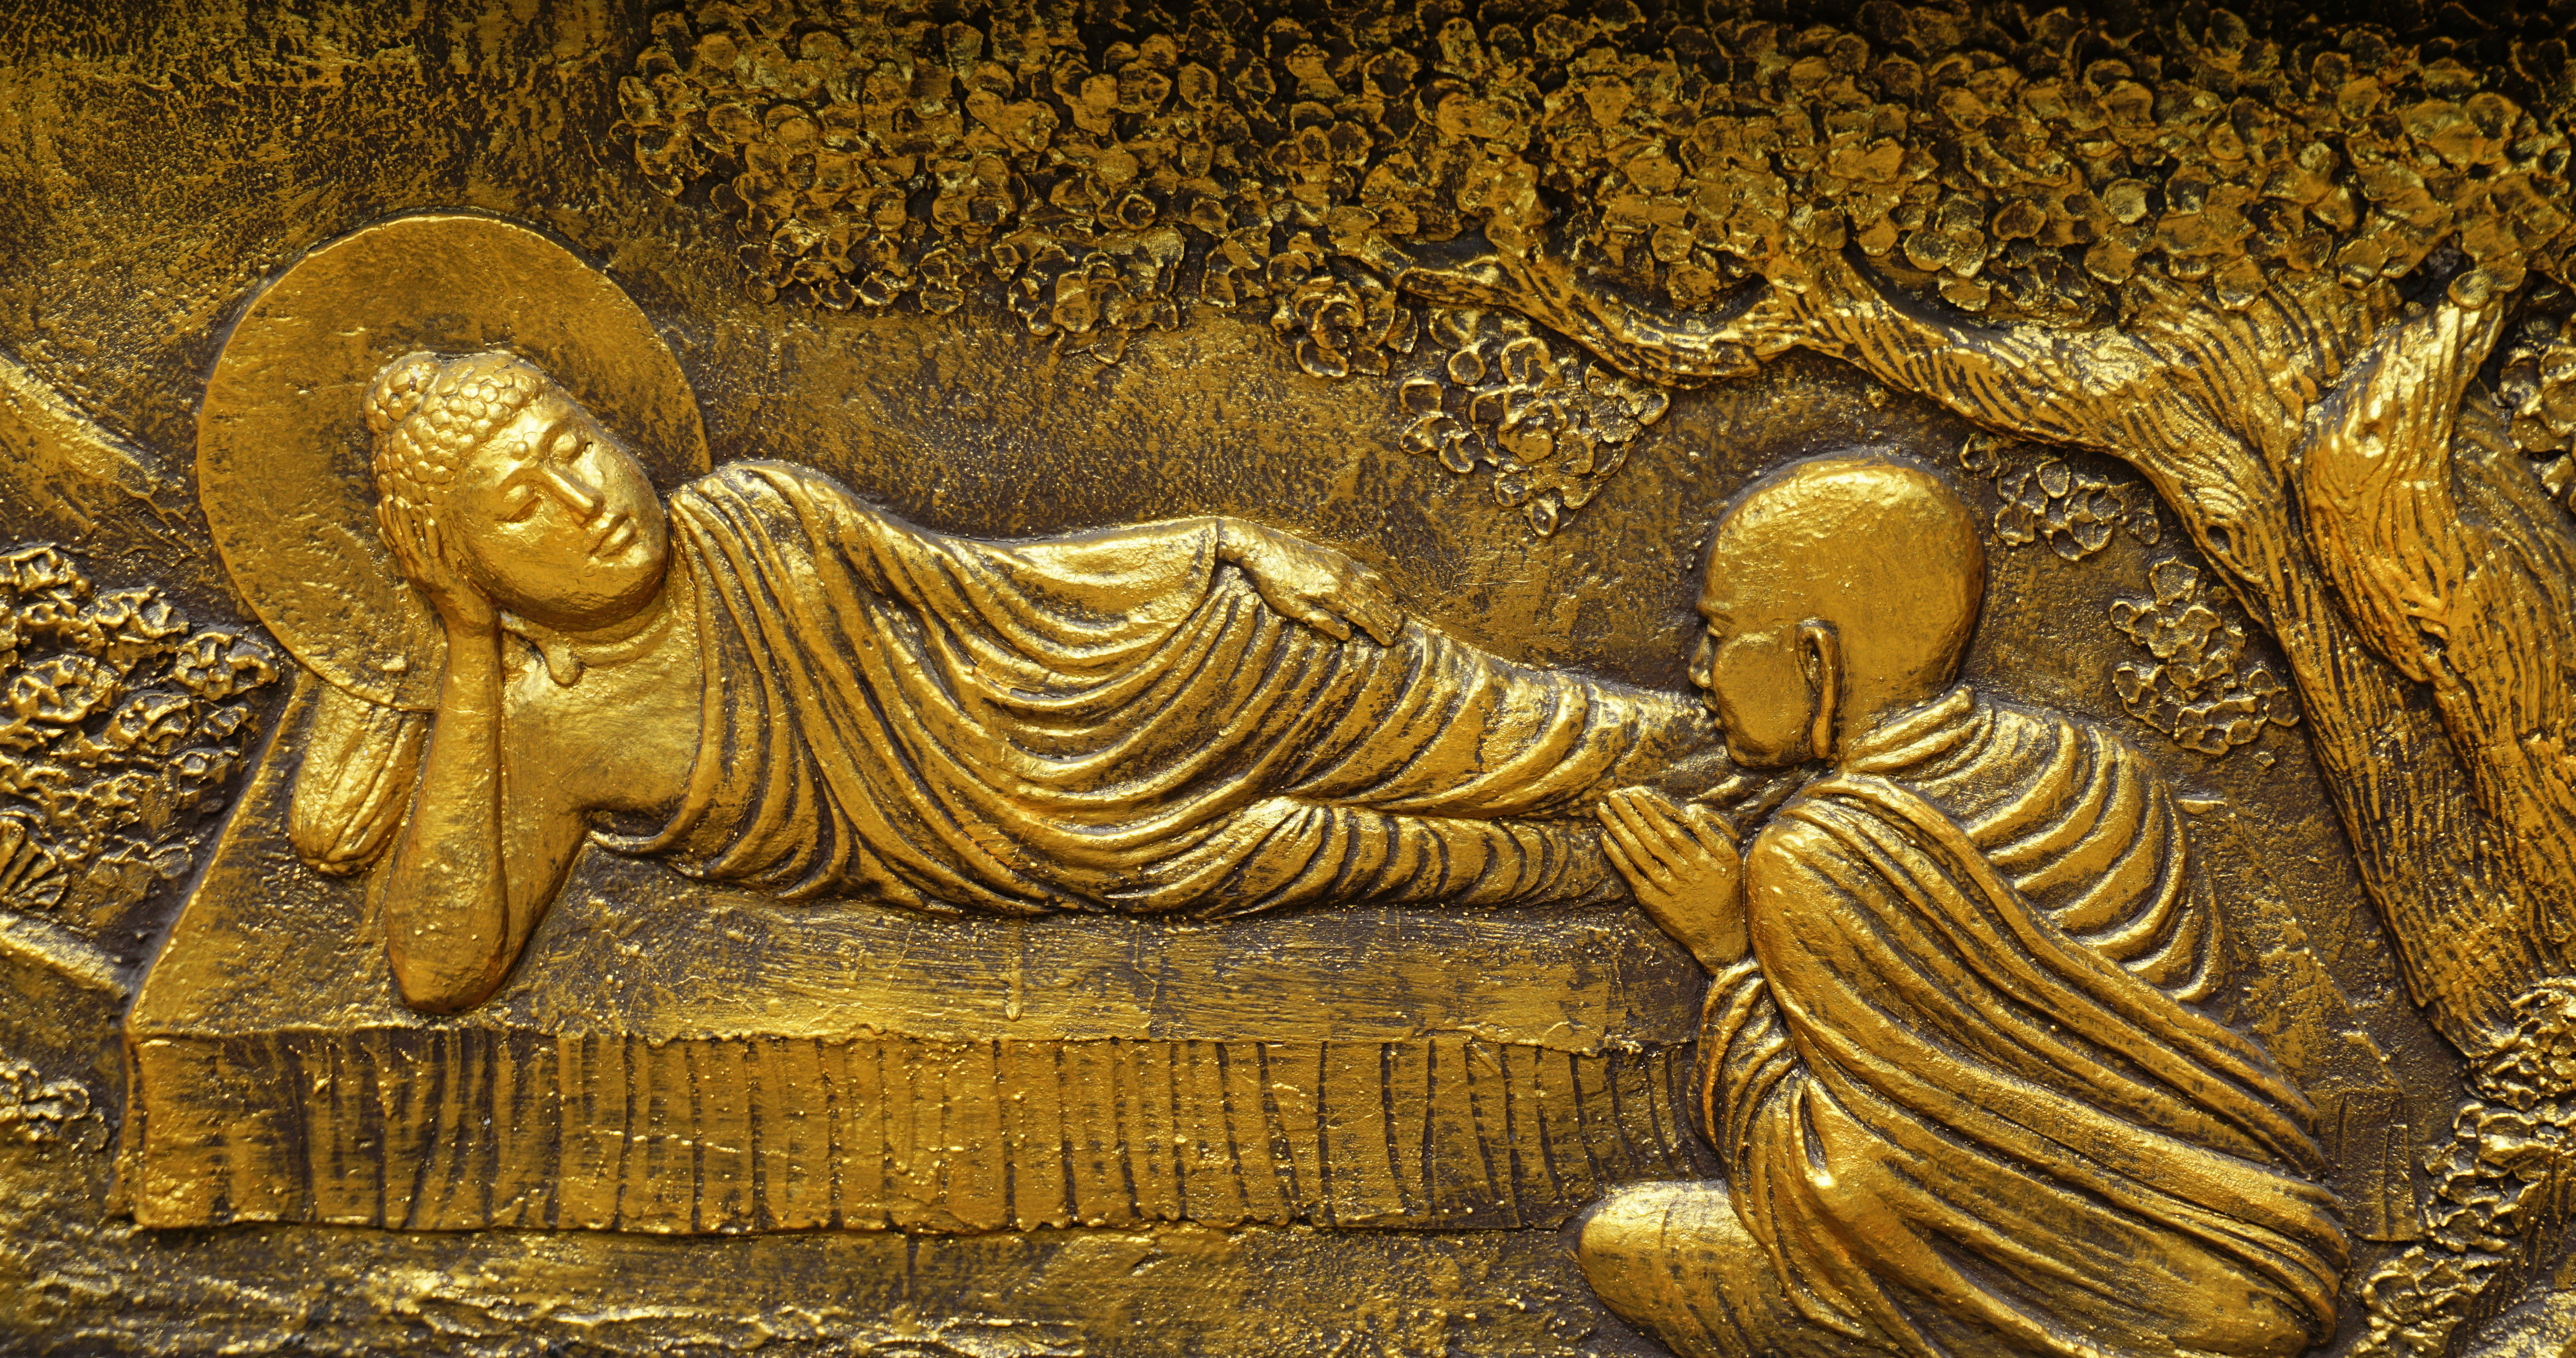 This East Javanese relief depicts the Buddha in his final days